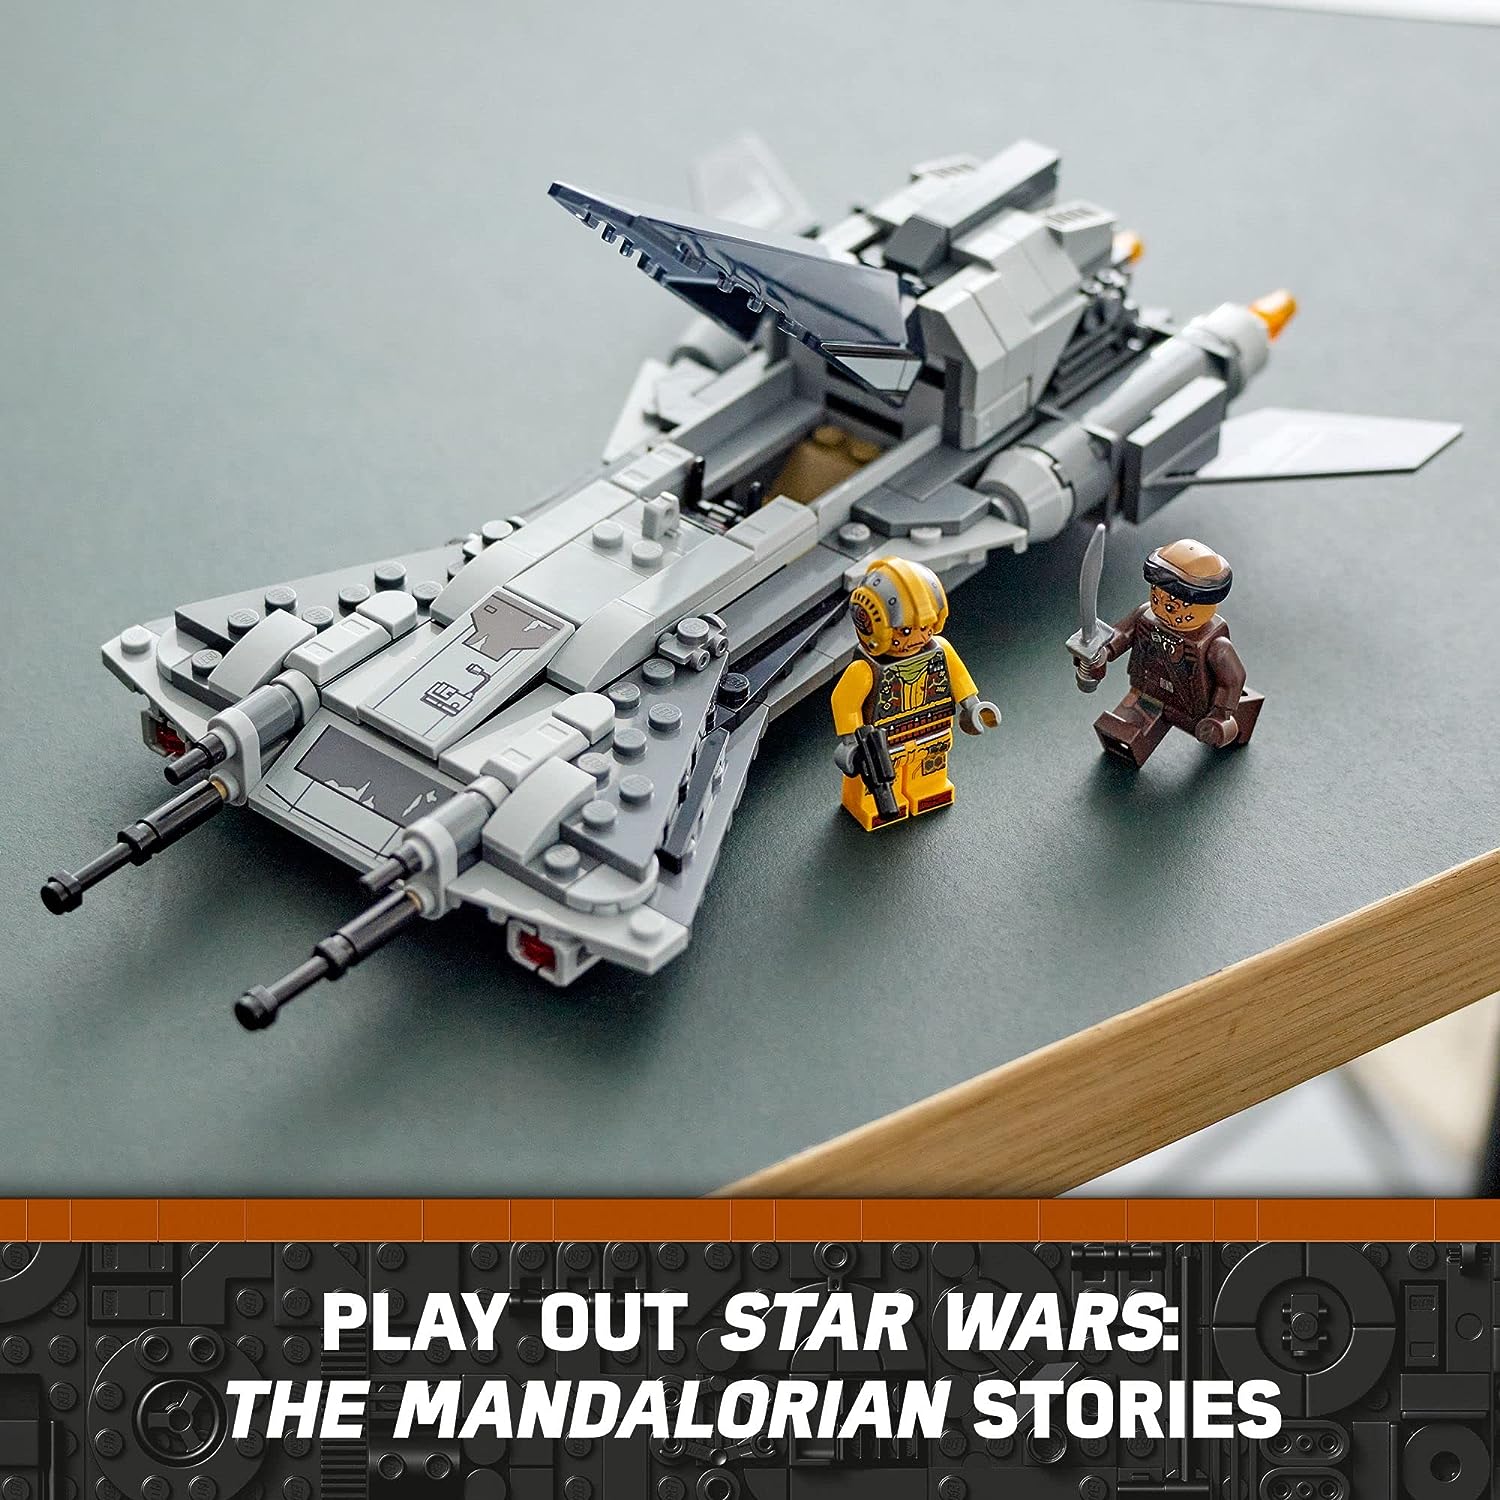 LEGO 75346 Star Wars Pirate Snub Fighter Buildable Starfighter Playset Featuring Pirate Pilot and Vane Characters from The Mandalorian Season 3